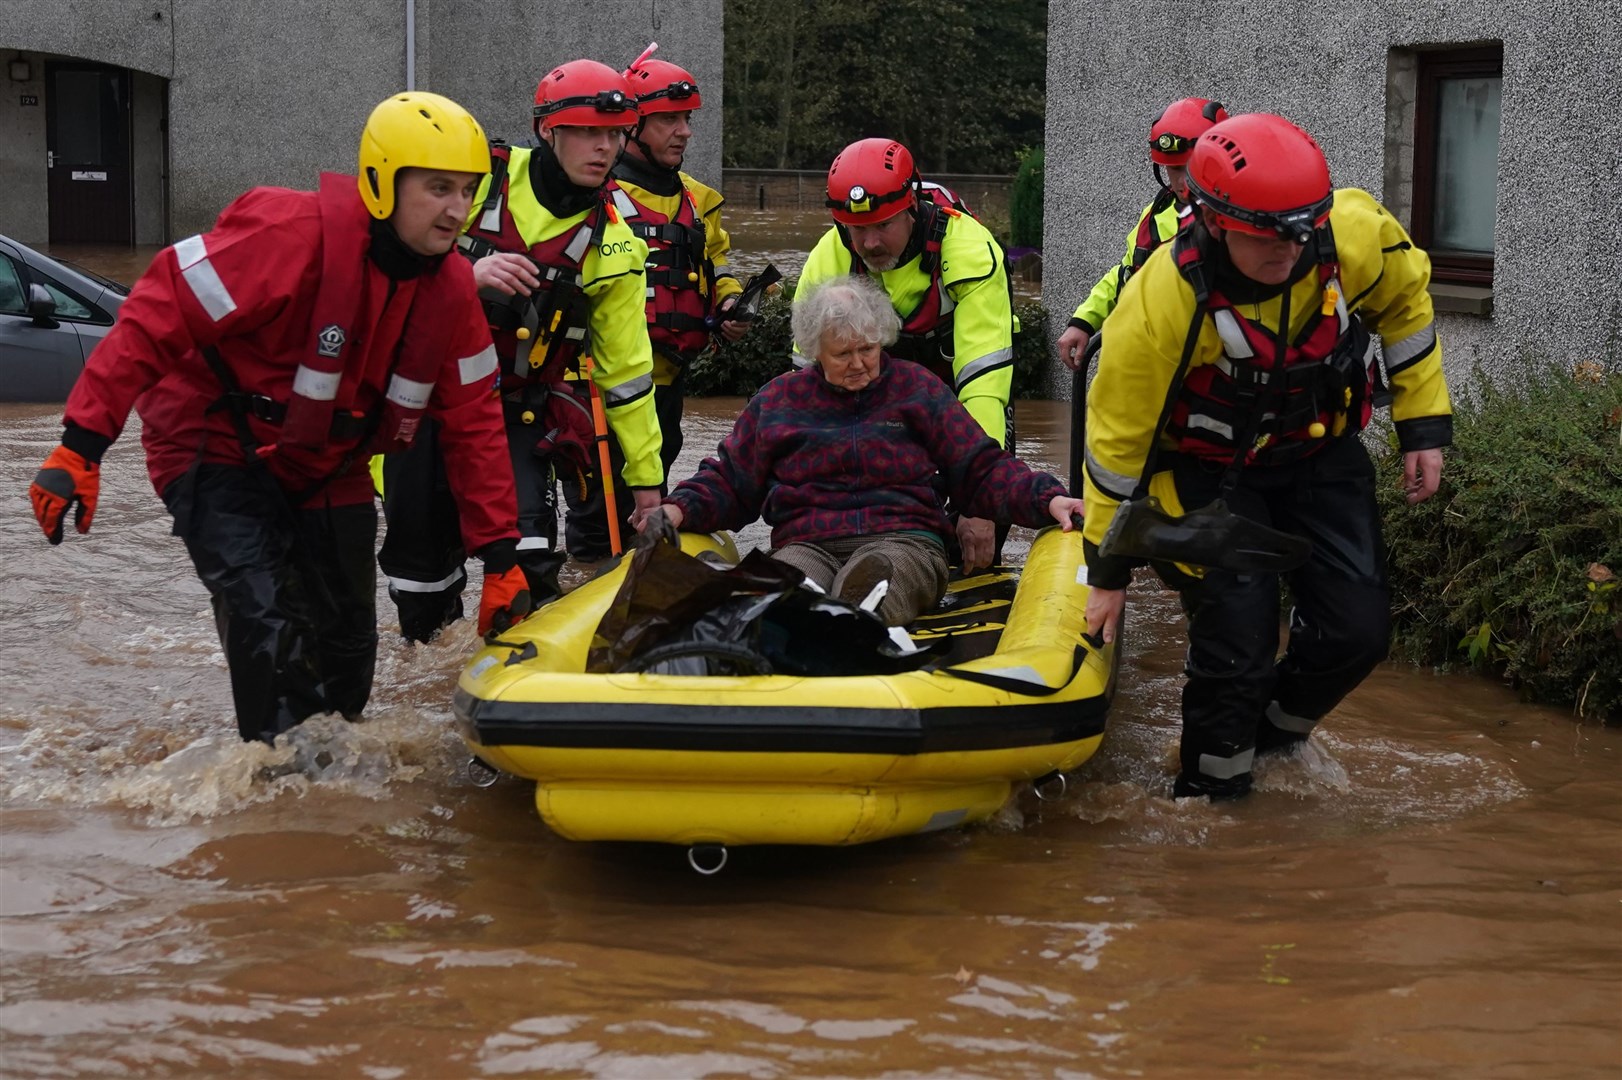 Members of the emergency services help local residents to safety in Brechin (Andrew Milligan/PA)